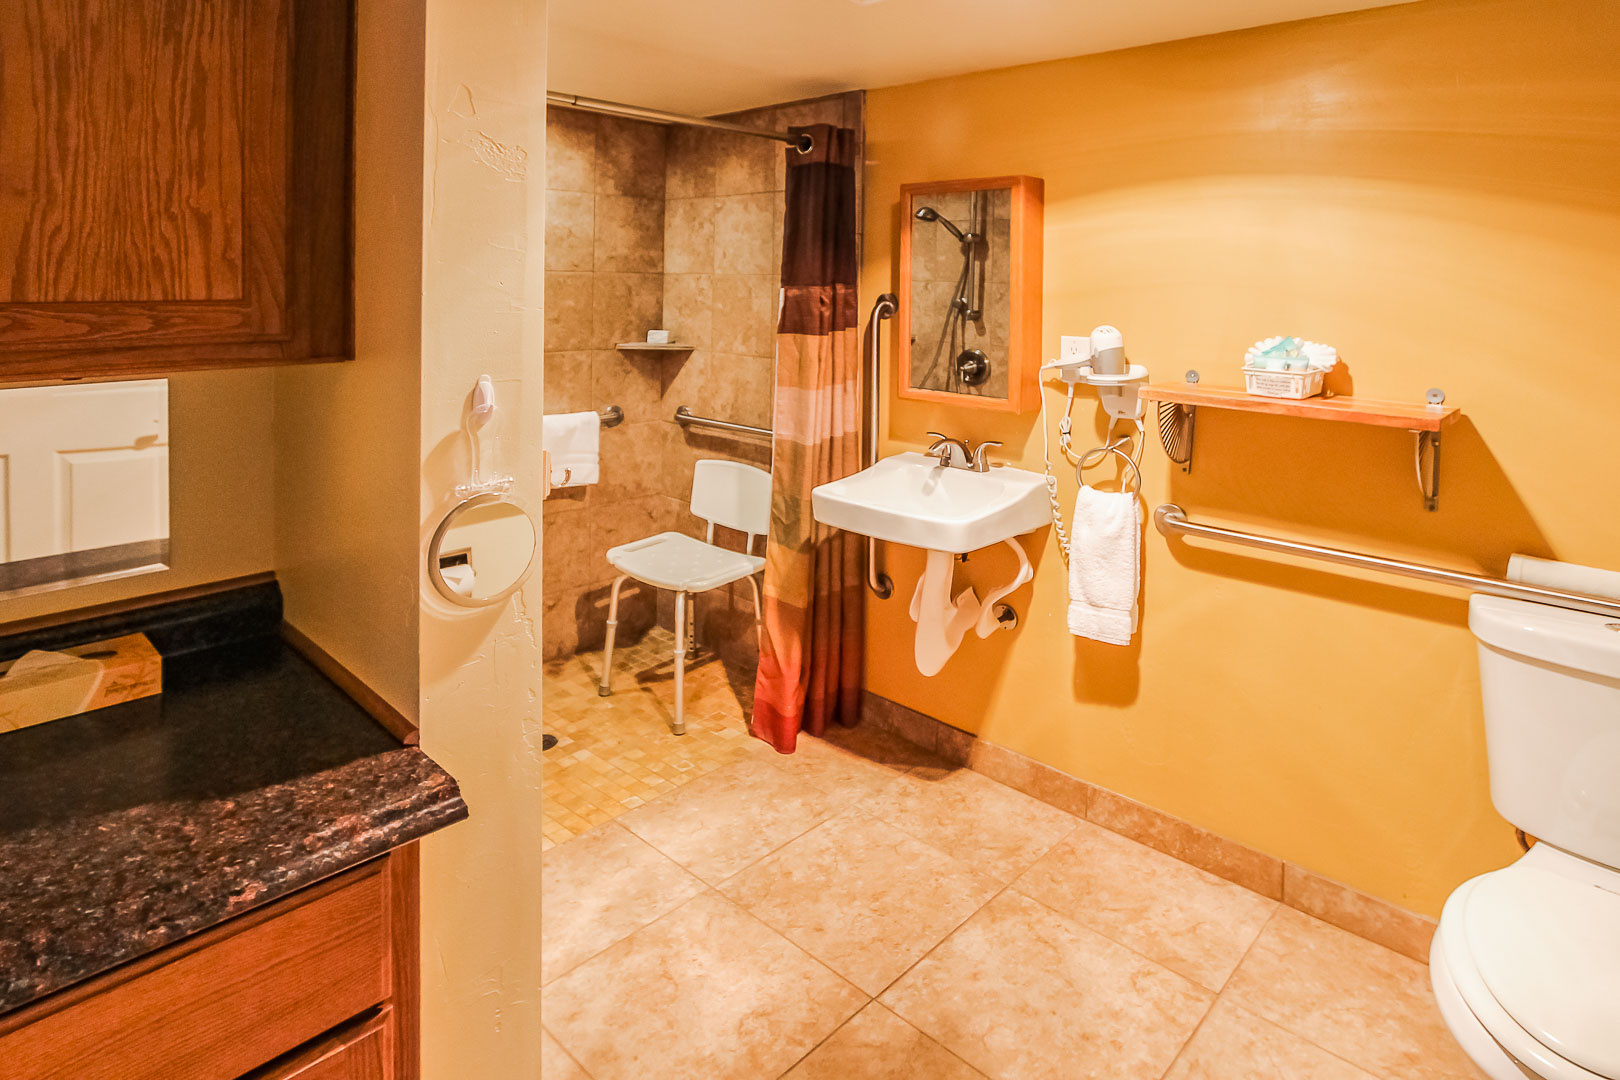 A clean bathroom at VRI's Roundhouse Resort in Pinetop, Arizona.